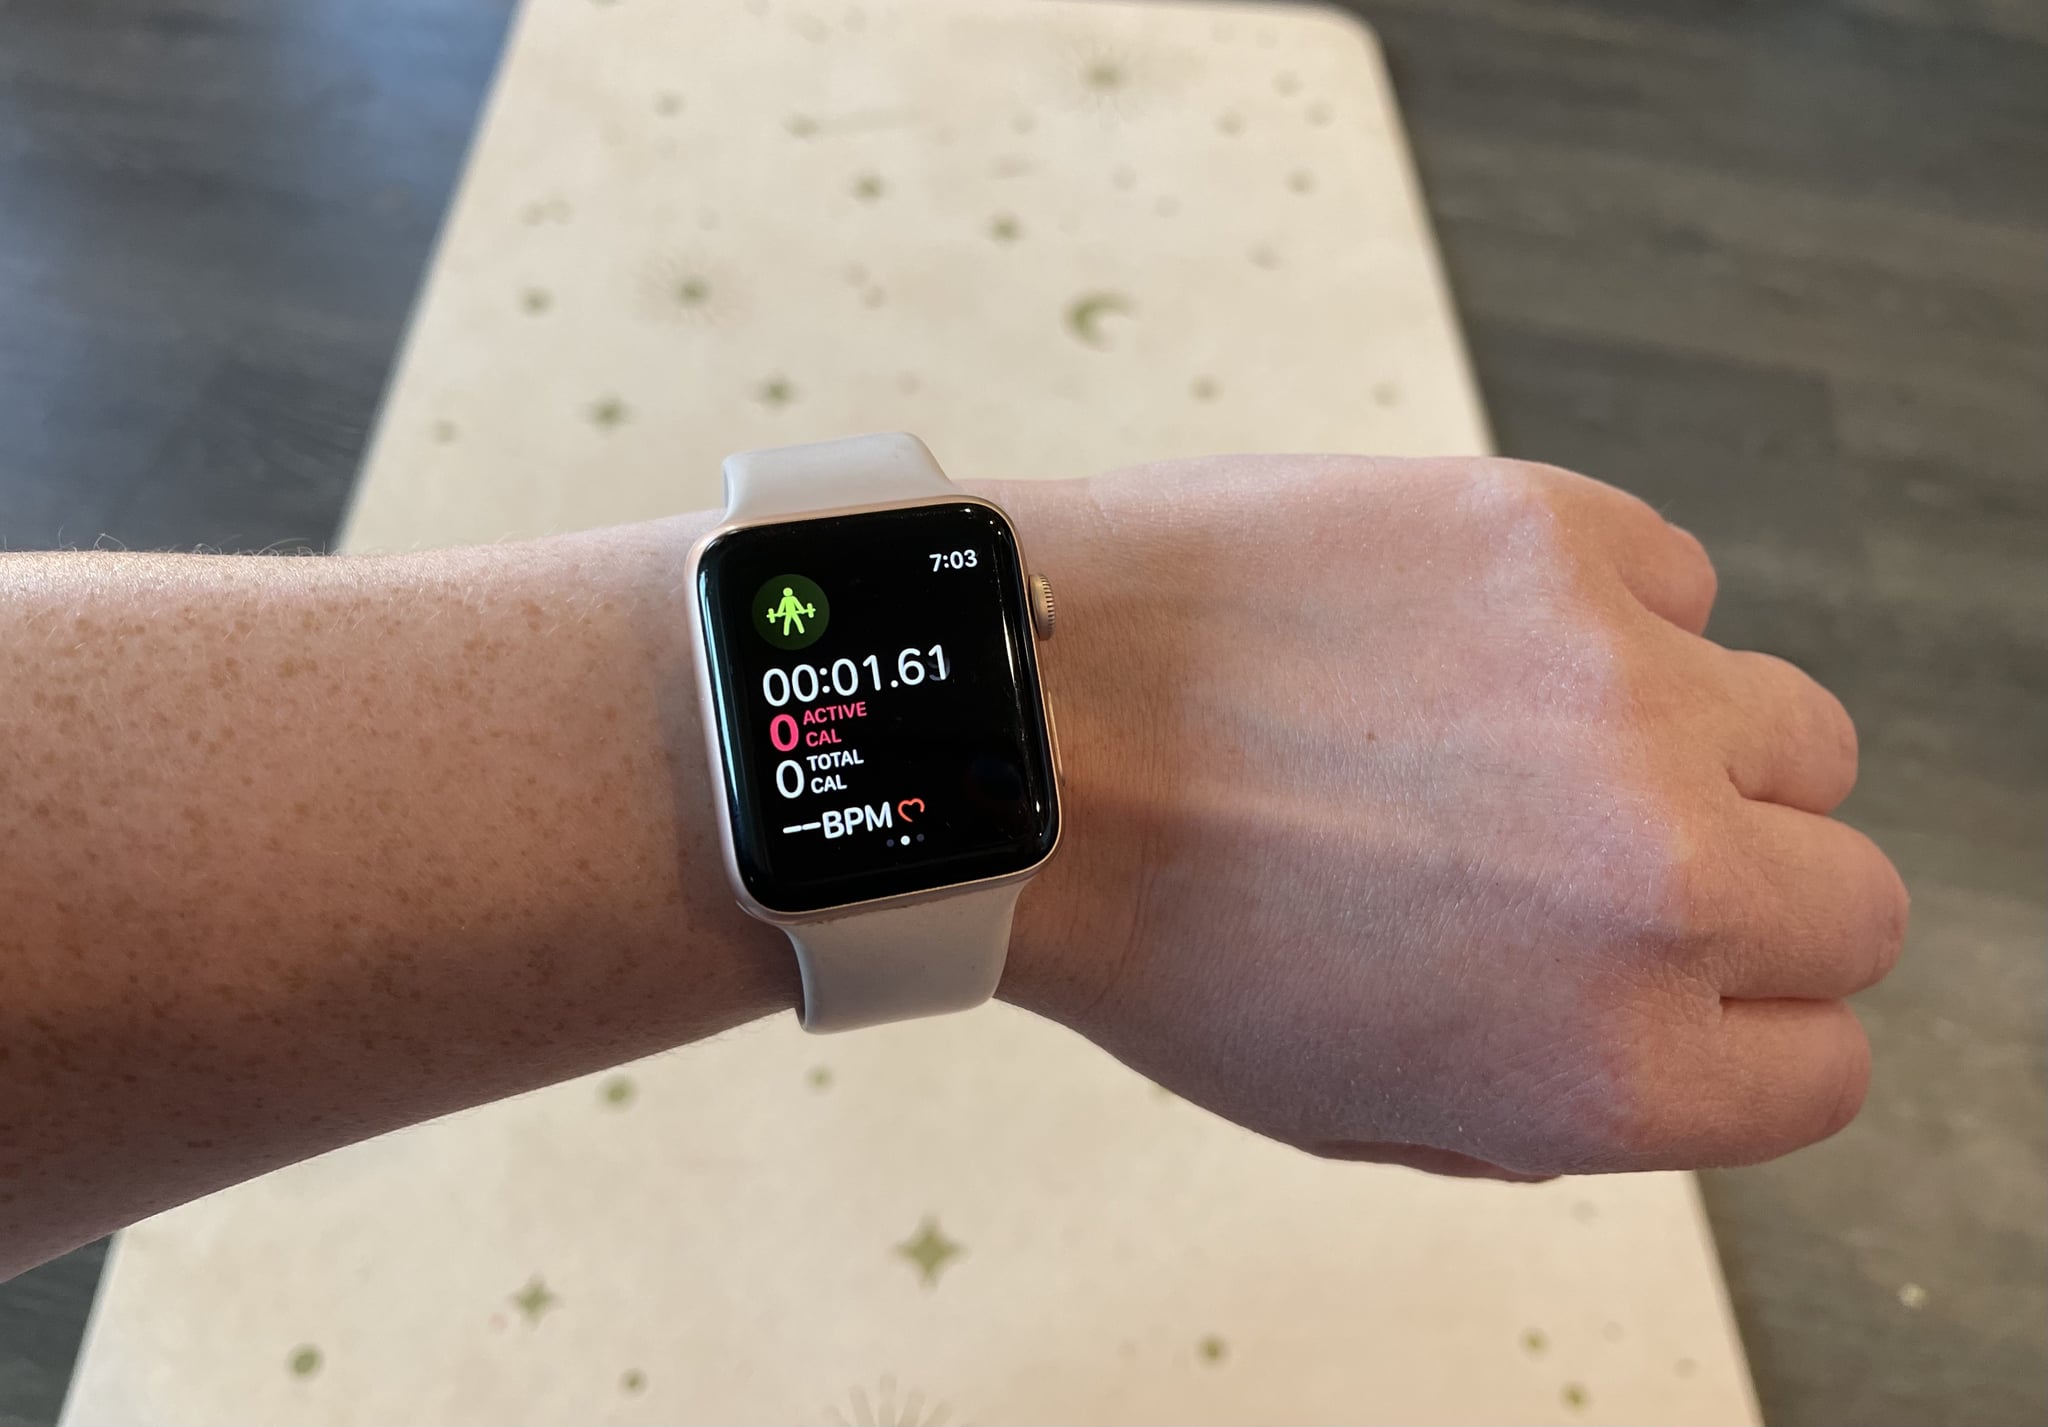 How to add workout to apple watch after workout